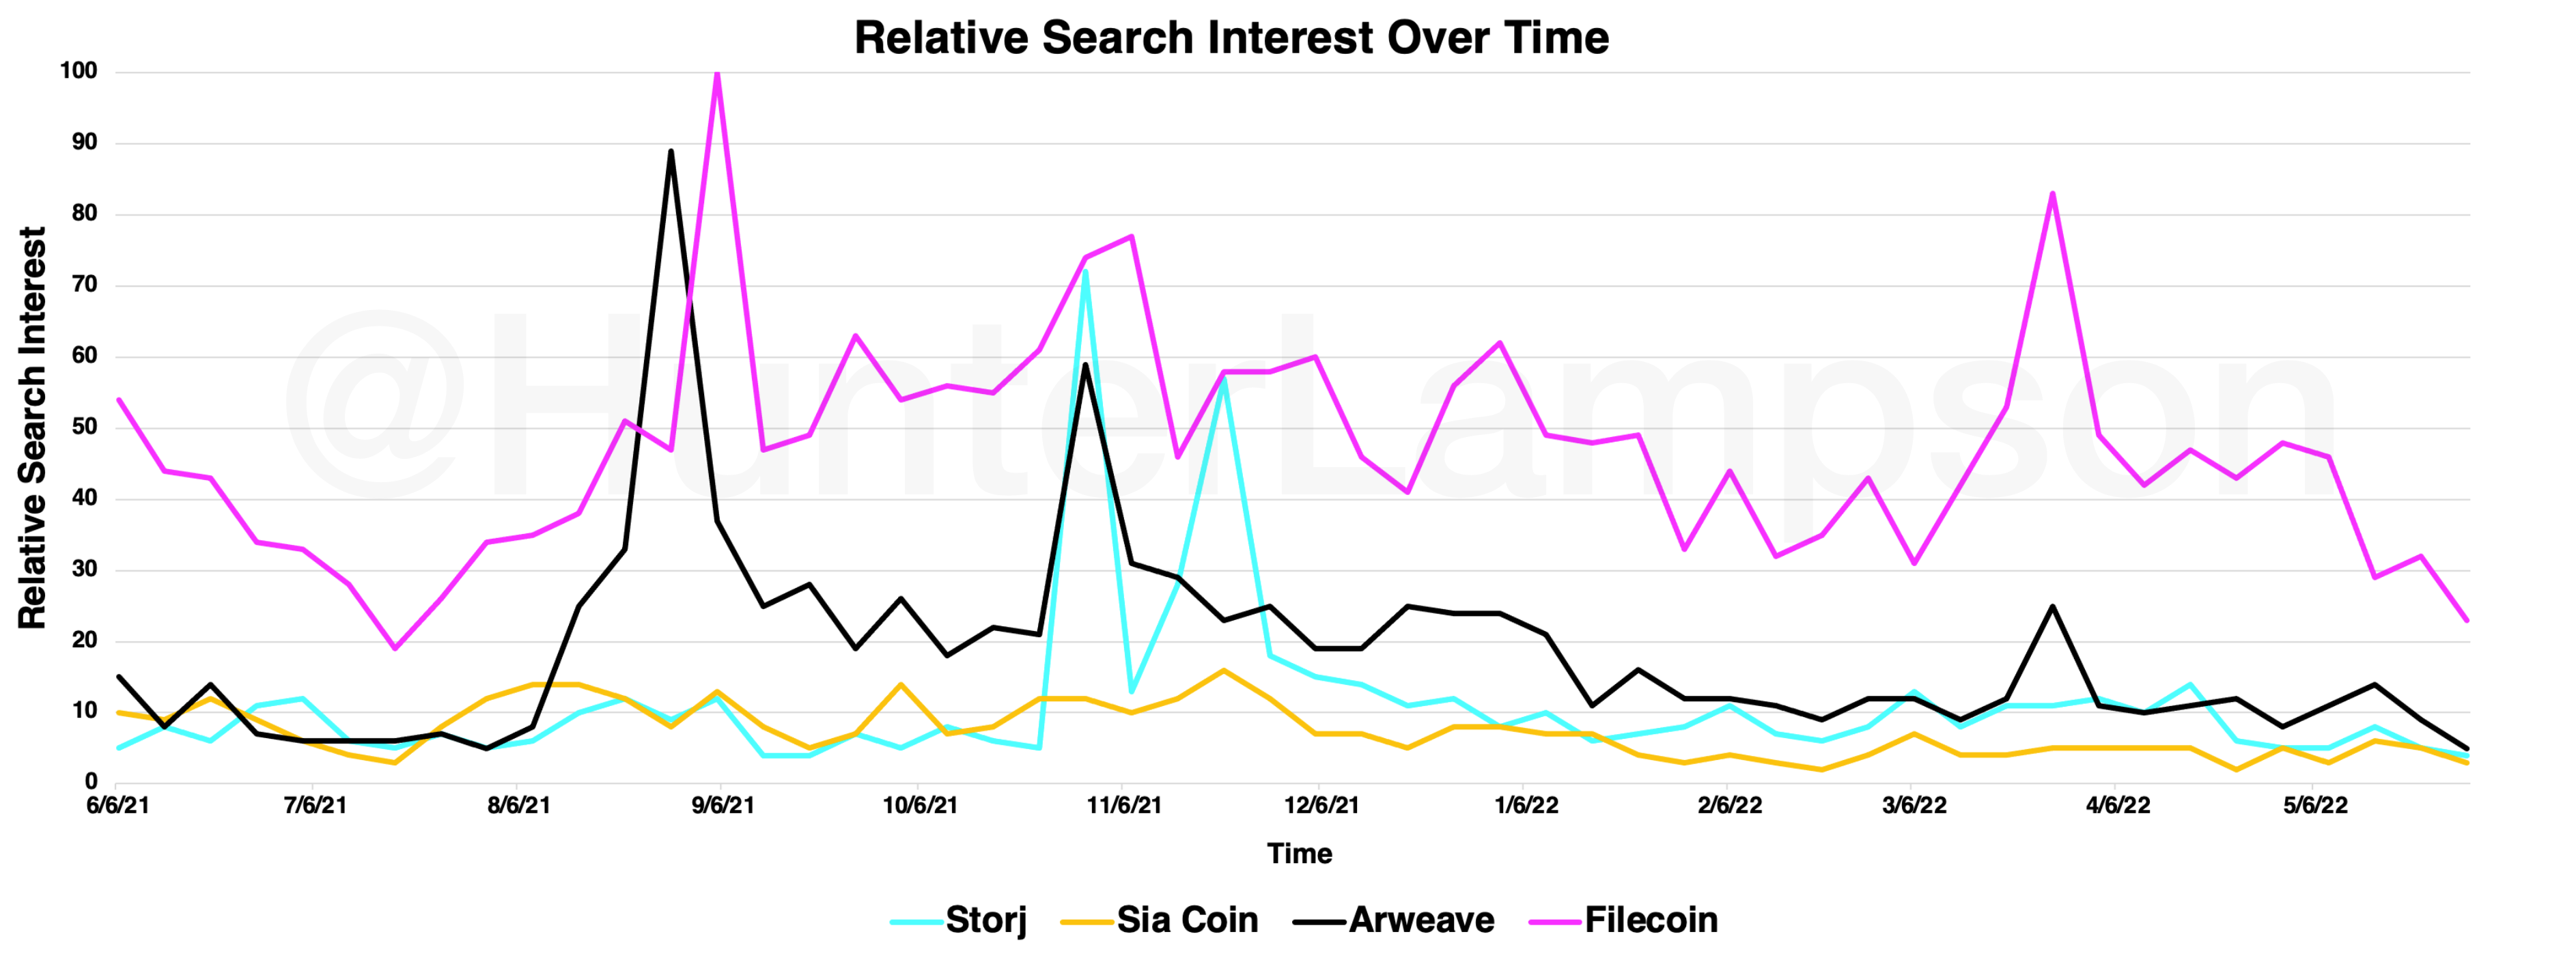 Figure 14. Relative search interest over time. Source: Google Trends.